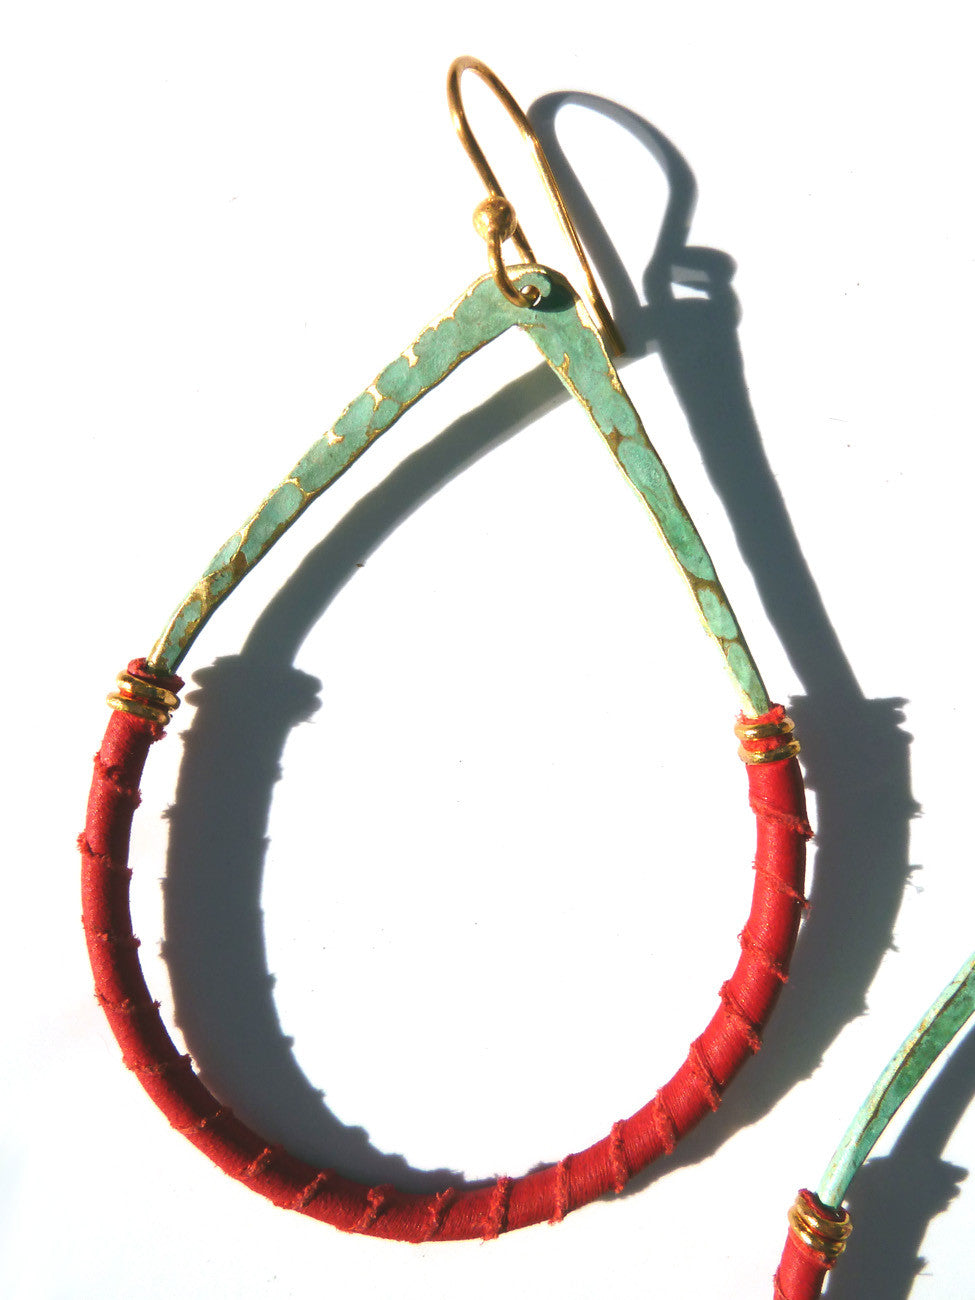 Earrings Teardrop Patina On Brass And Red Leather